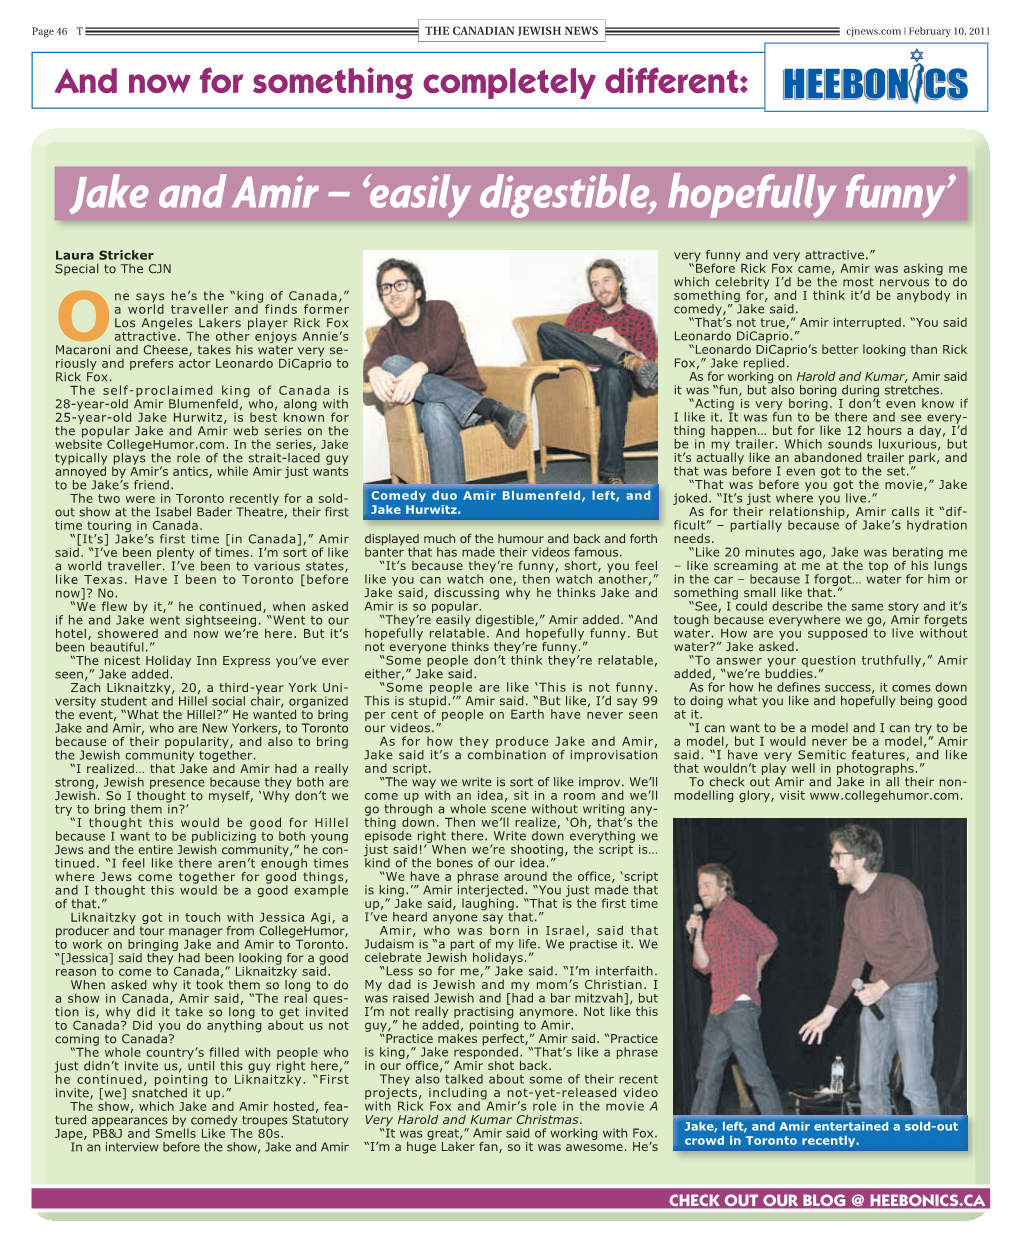 Jake and Amir – 'Easily Digestible, Hopefully Funny'